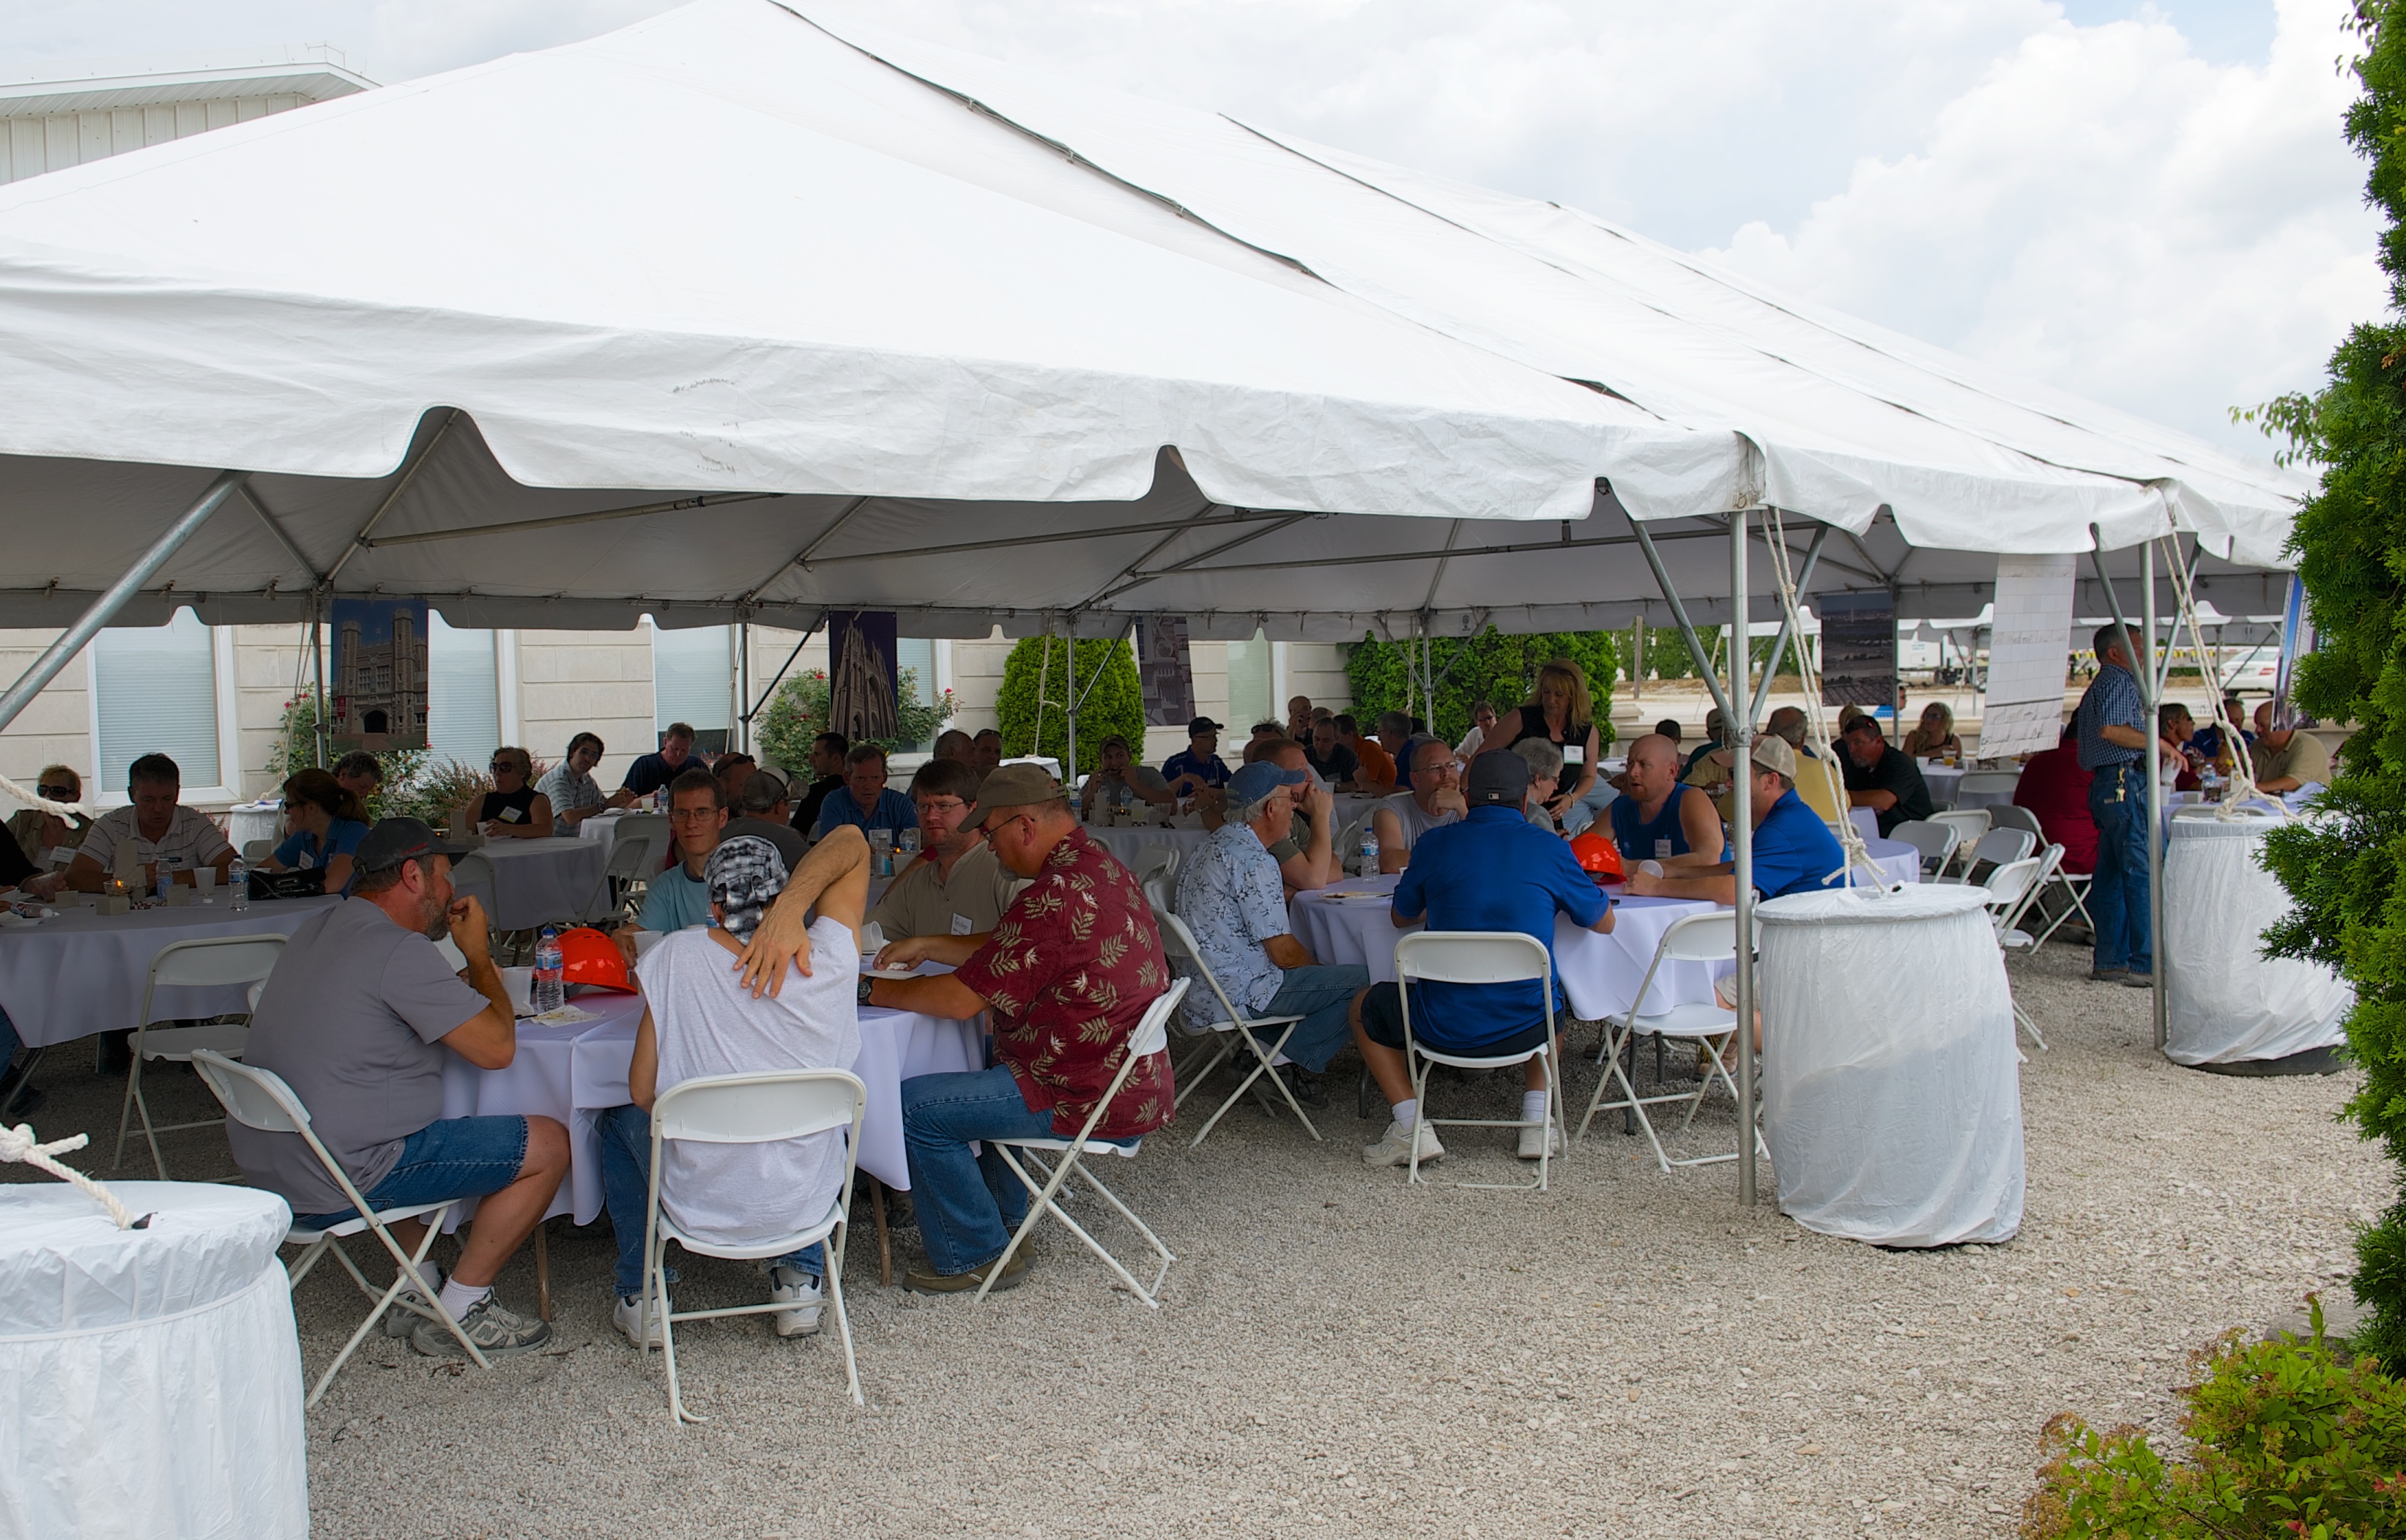 Guests enjoy the barbecue at Indiana Limestone Company's "Rock 'n' Quarry" celebration.